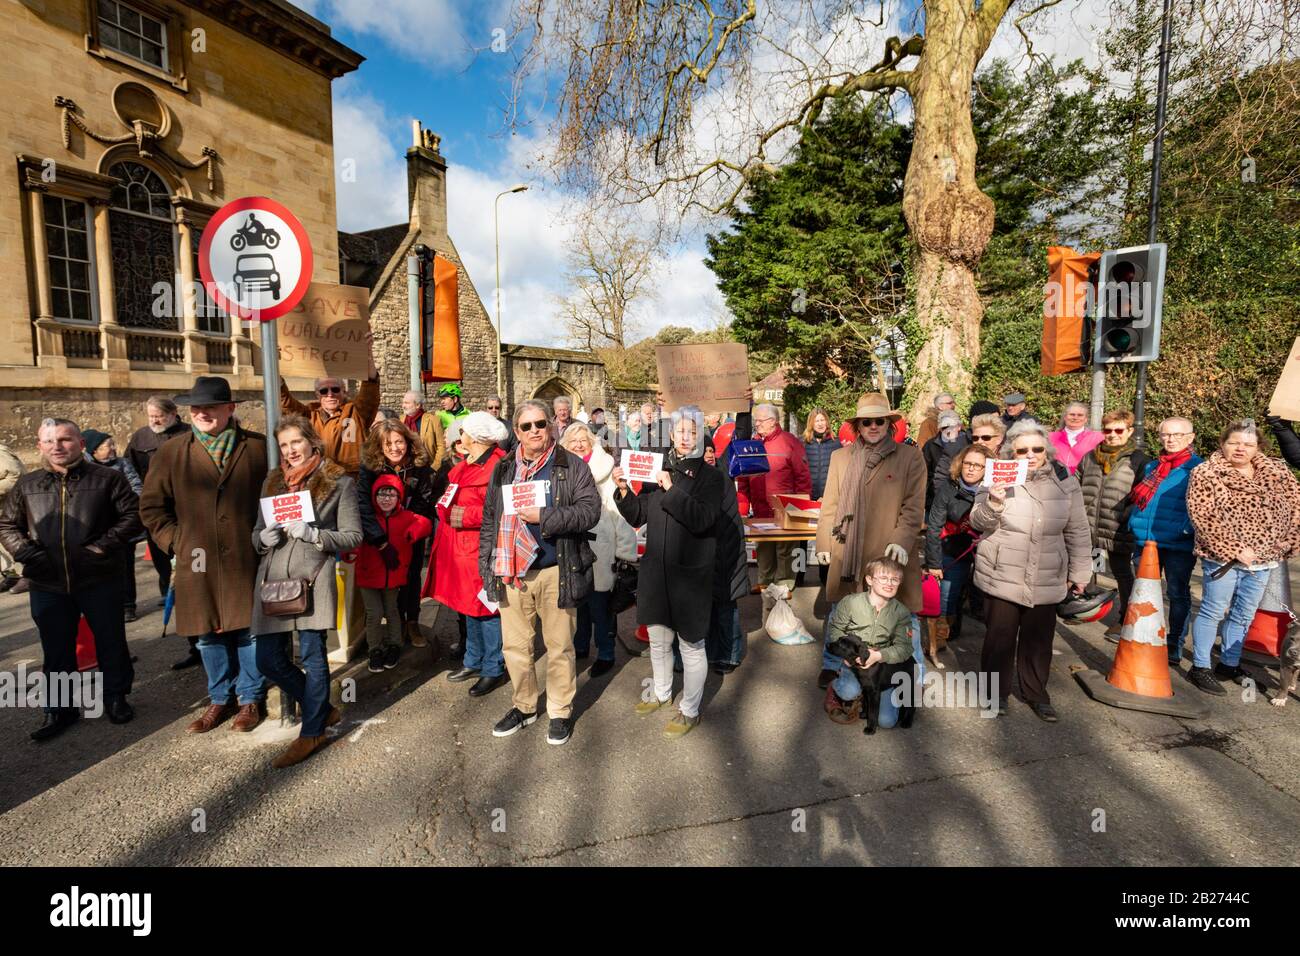 Oxford, Oxfordshire, UK. 1 March, 2020. Dozens turn out for the Save Walton Street demonstration.  Residents and Businesses of Oxford's historic Jericho district protest the Oxfordshire County Council's closure of the main artery Walton Street. The street closed with out proper traffic or air quality surveys or consultation with residents and businesses. Credit: Sidney Bruere/Alamy Live News Stock Photo